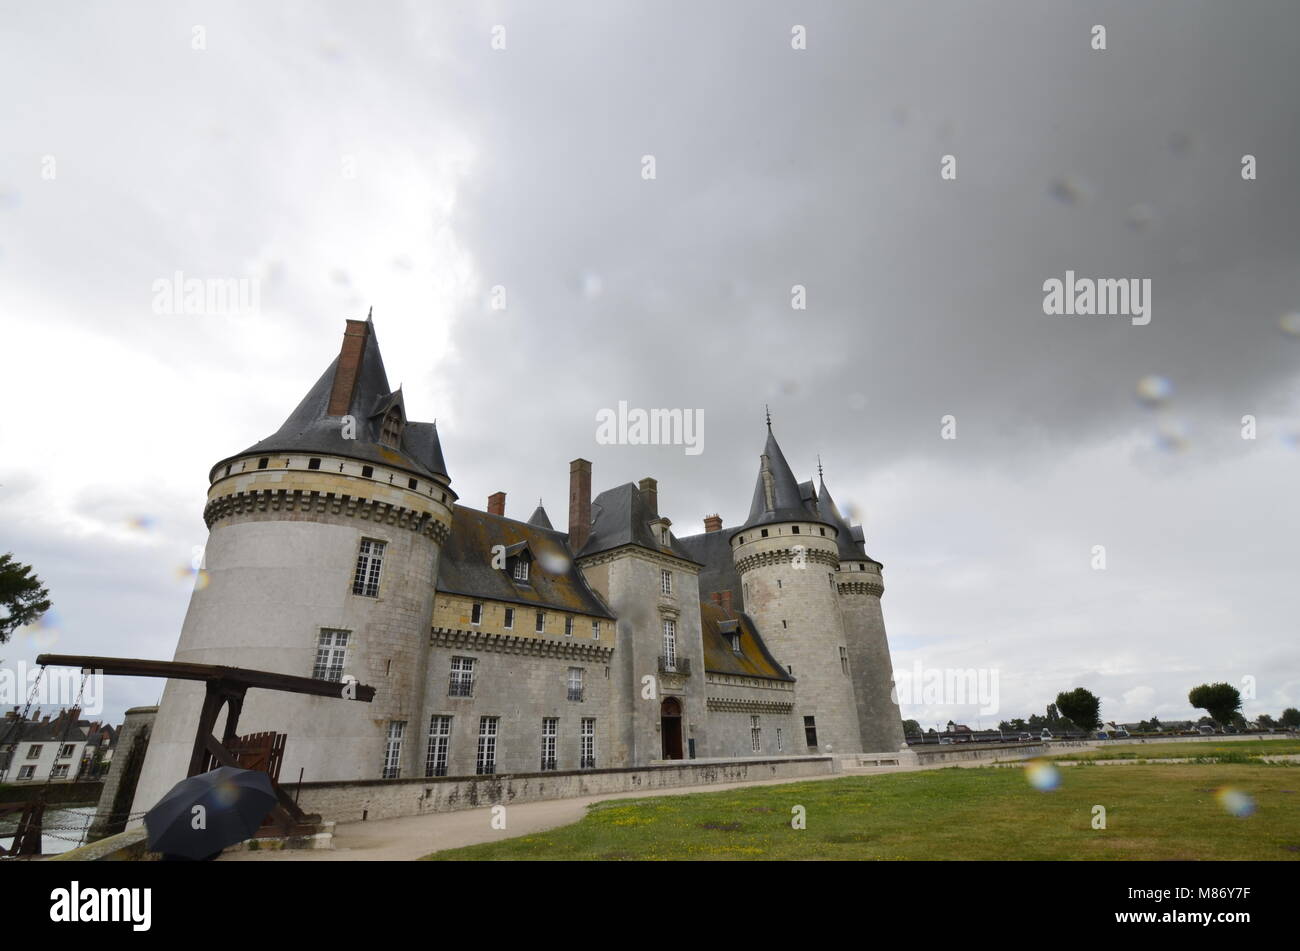 Castle of Sully-sur-Loire, Loire region, France. Snap of 30 June 2017 17:38. Shooting from the park towards the castle entrance. The façade is mirrore Stock Photo